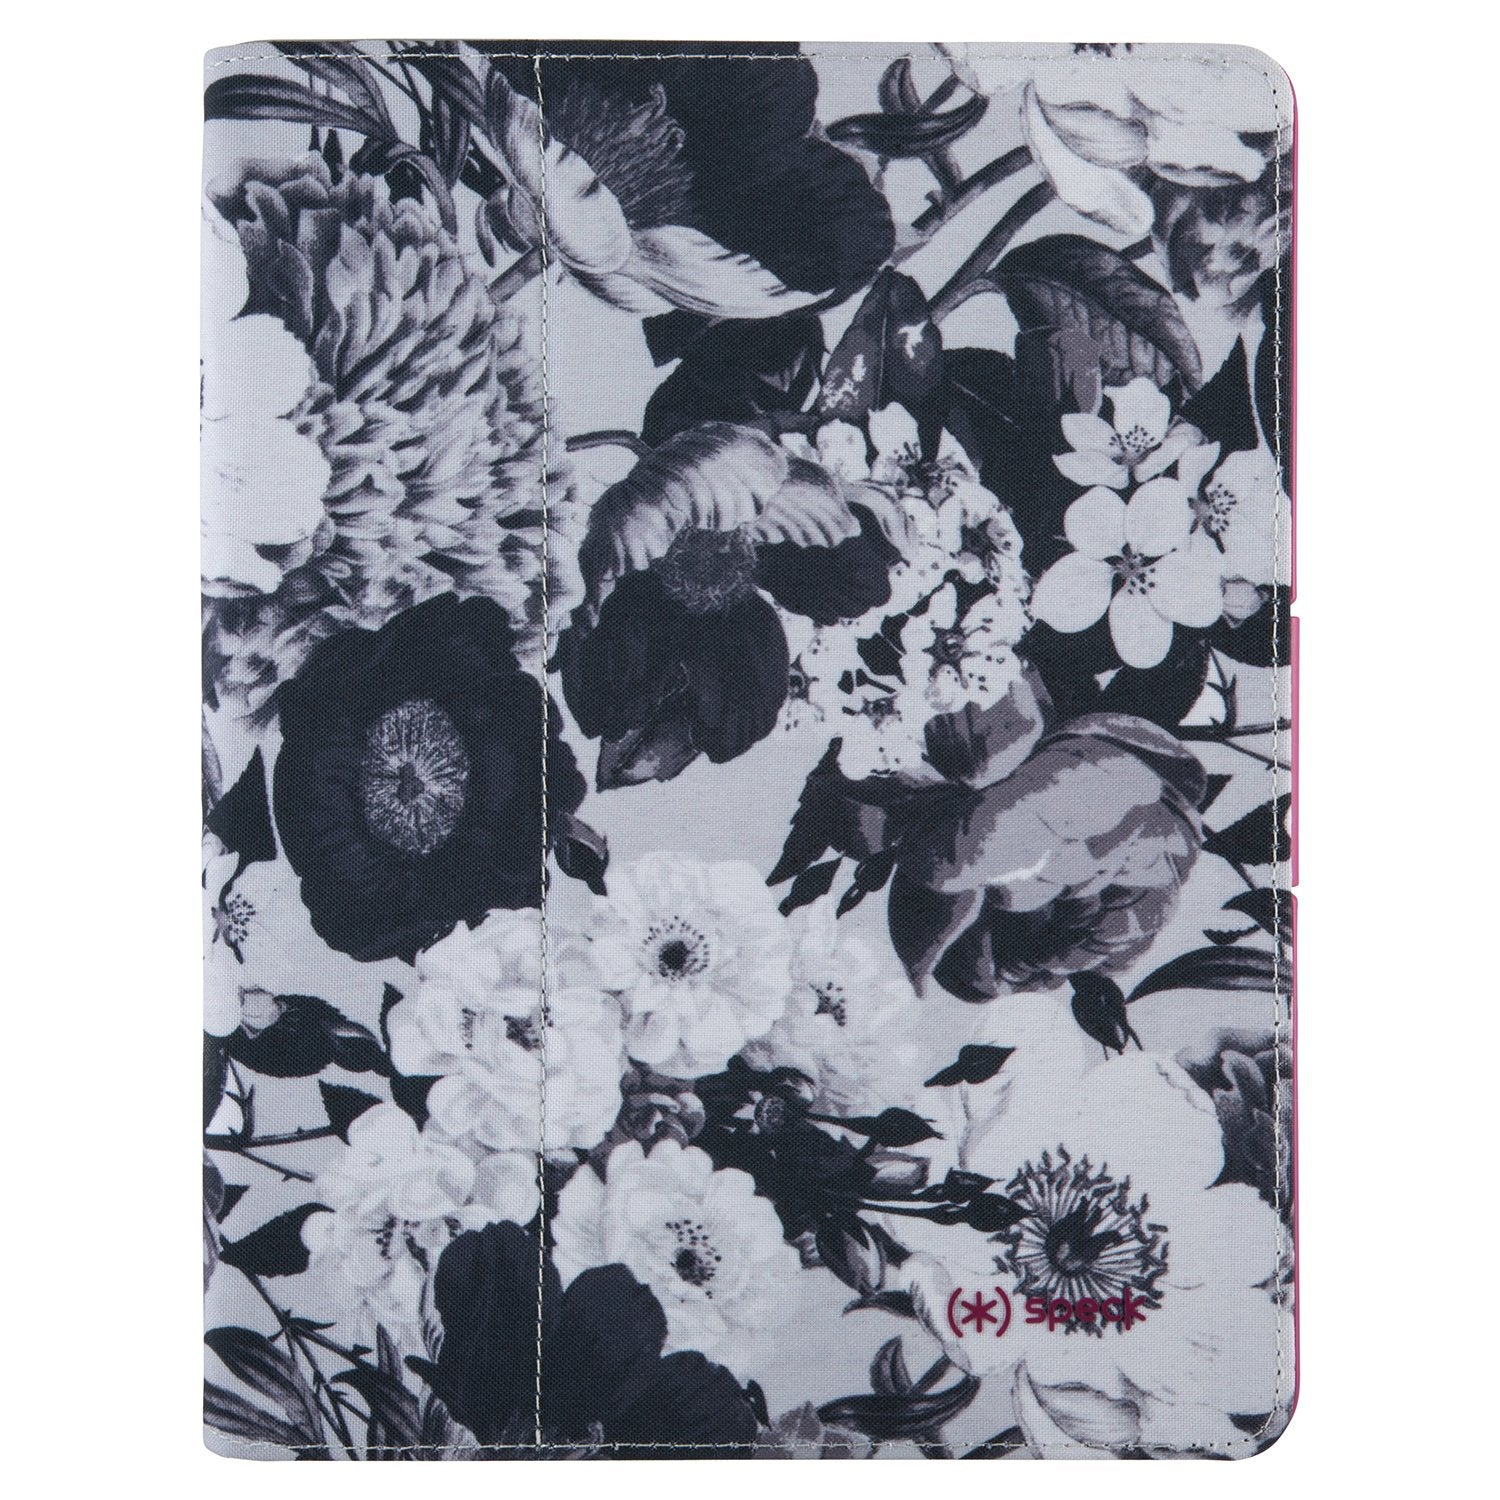 Speck Products FitFolio Case for iPad 2/3/4, Vintage Bouquet/Boysenberry